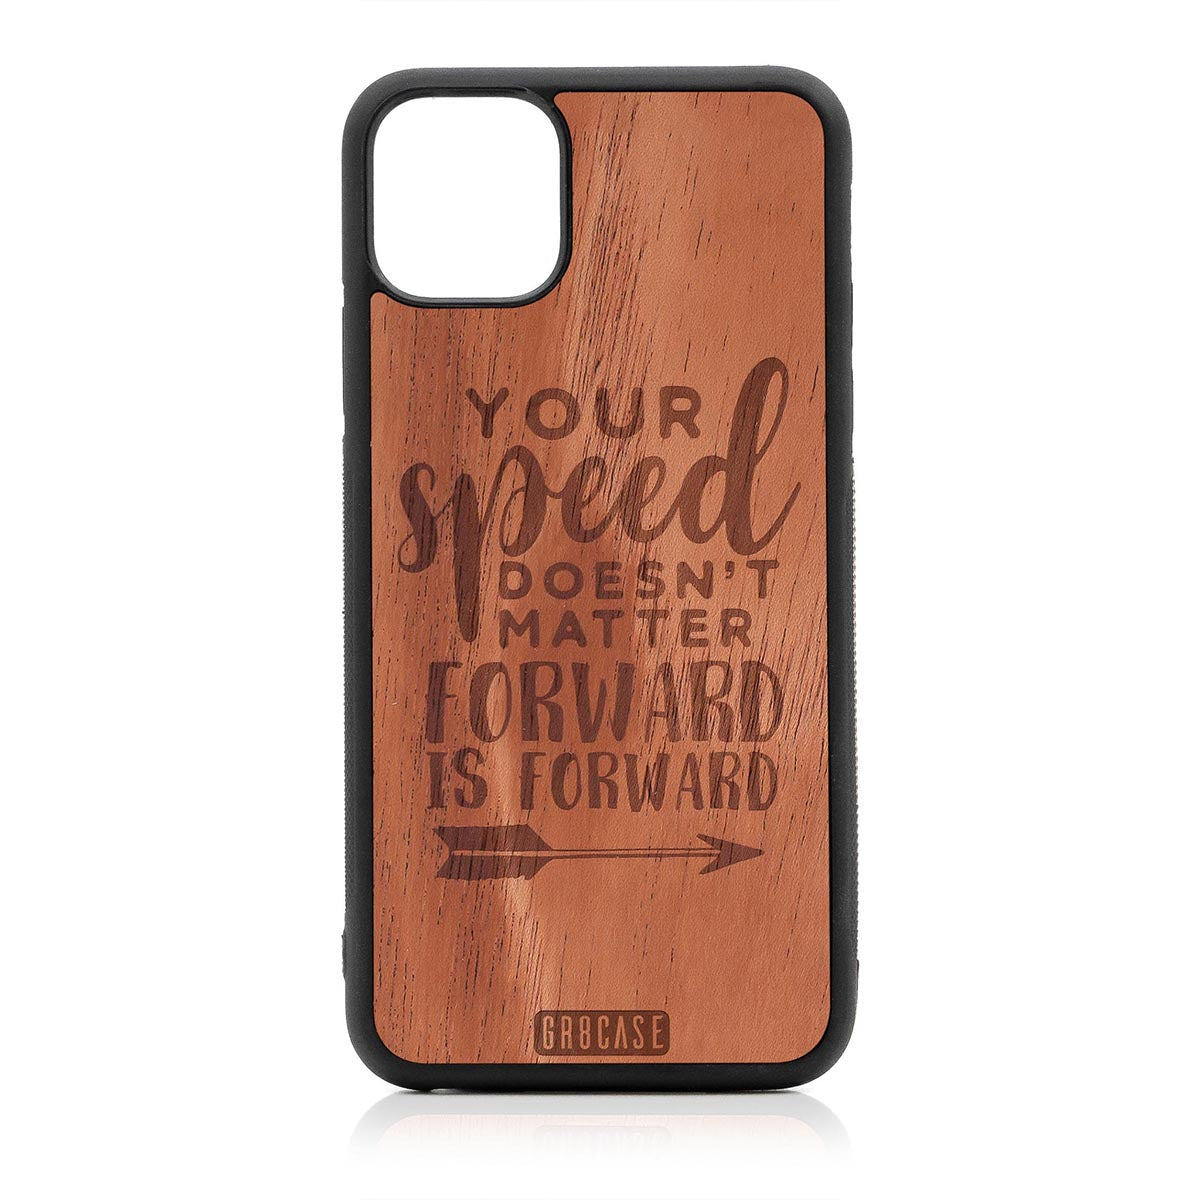 Your Speed Doesn't Matter Forward Is Forward Design Wood Case For iPhone 11 Pro Max